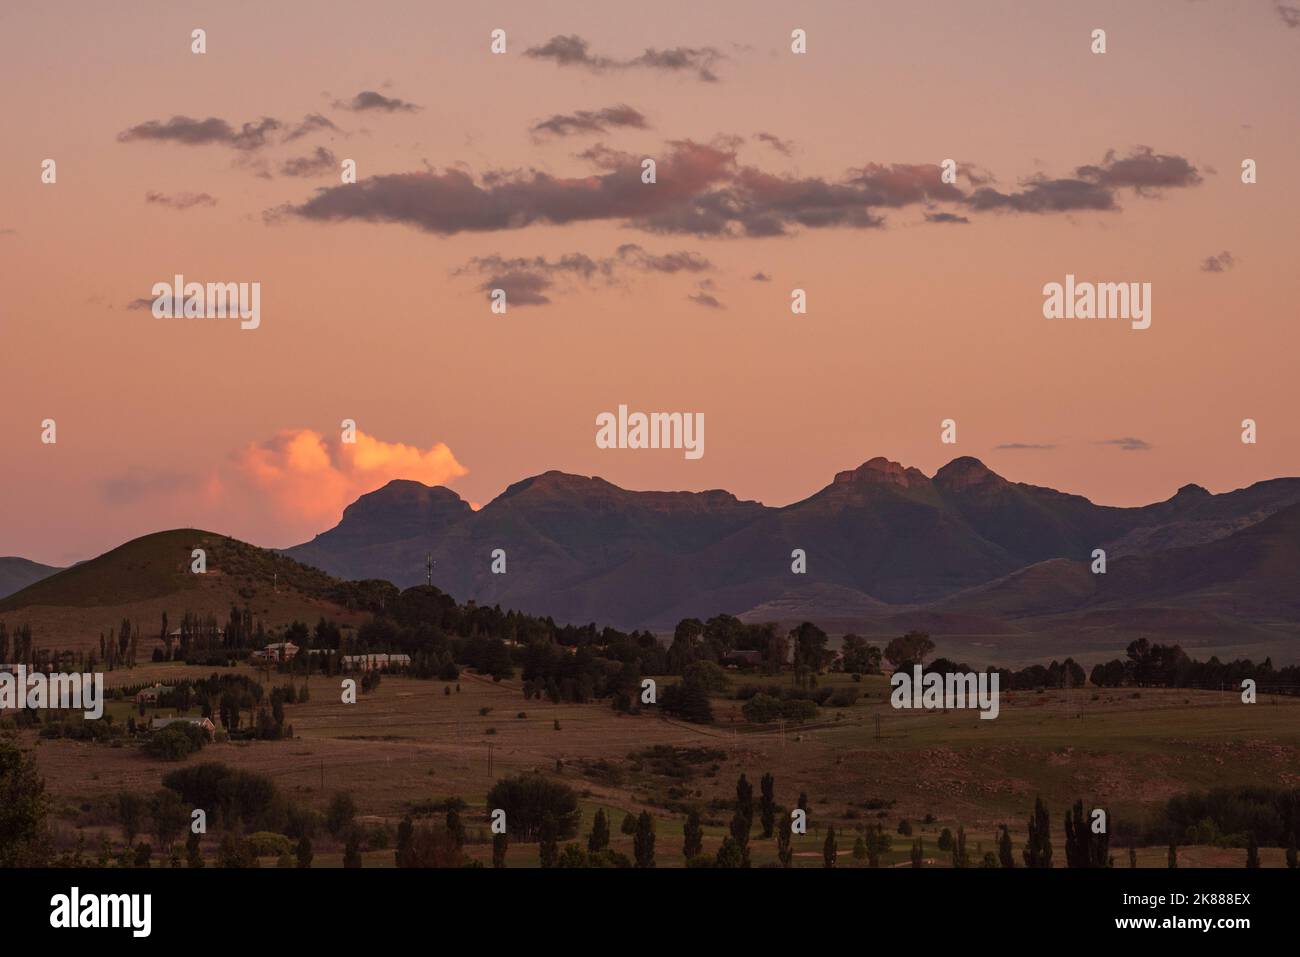 A view of the mountains under an orange sky at sunset in Clarens, South Africa. The popular town is near the Golden Gate Highlands National Park, whic Stock Photo